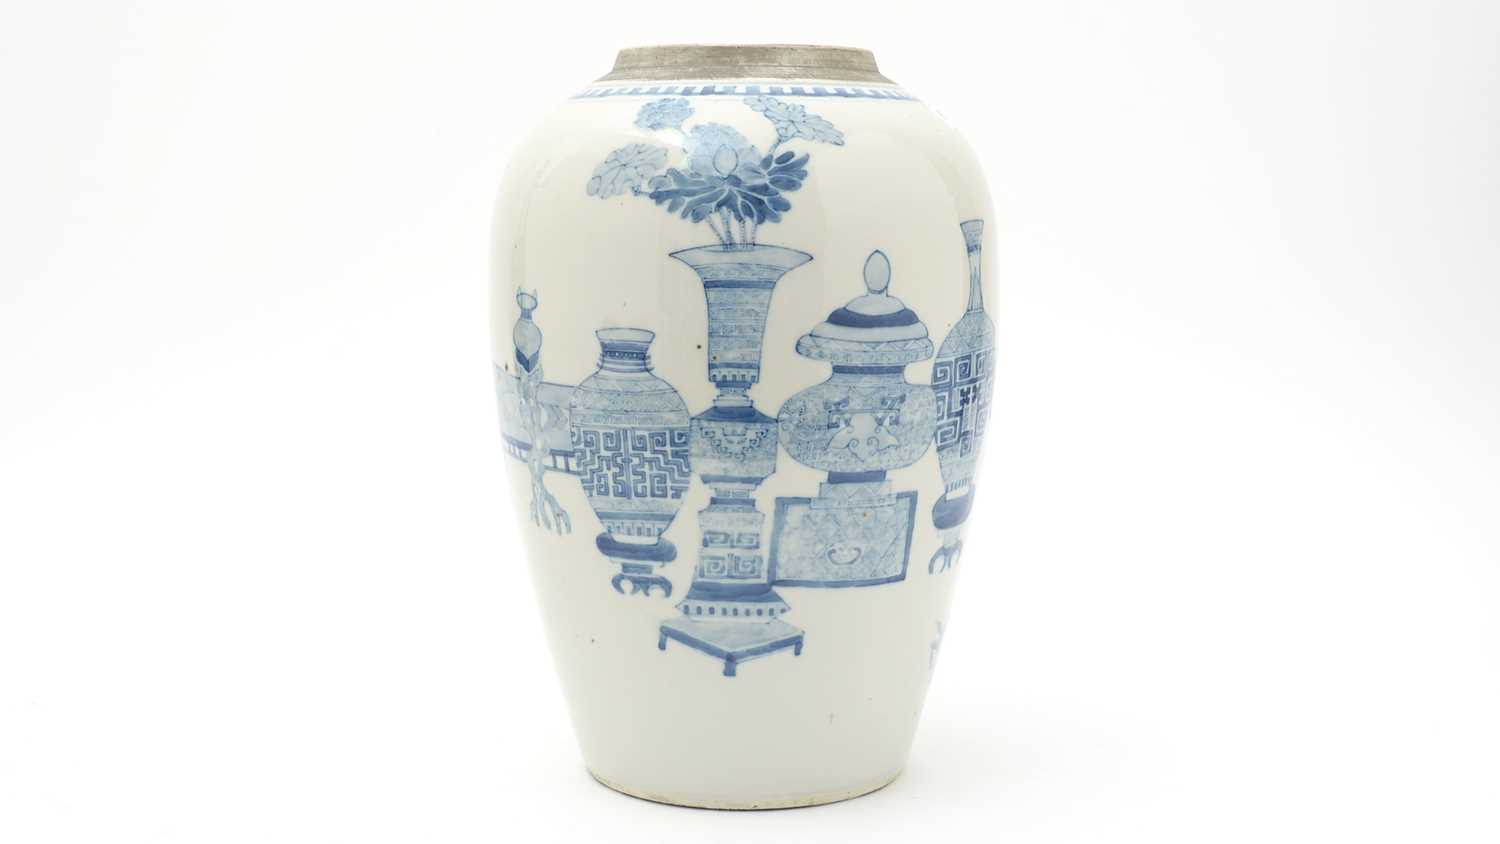 Lot 653 - Chinese tall blue and white jar